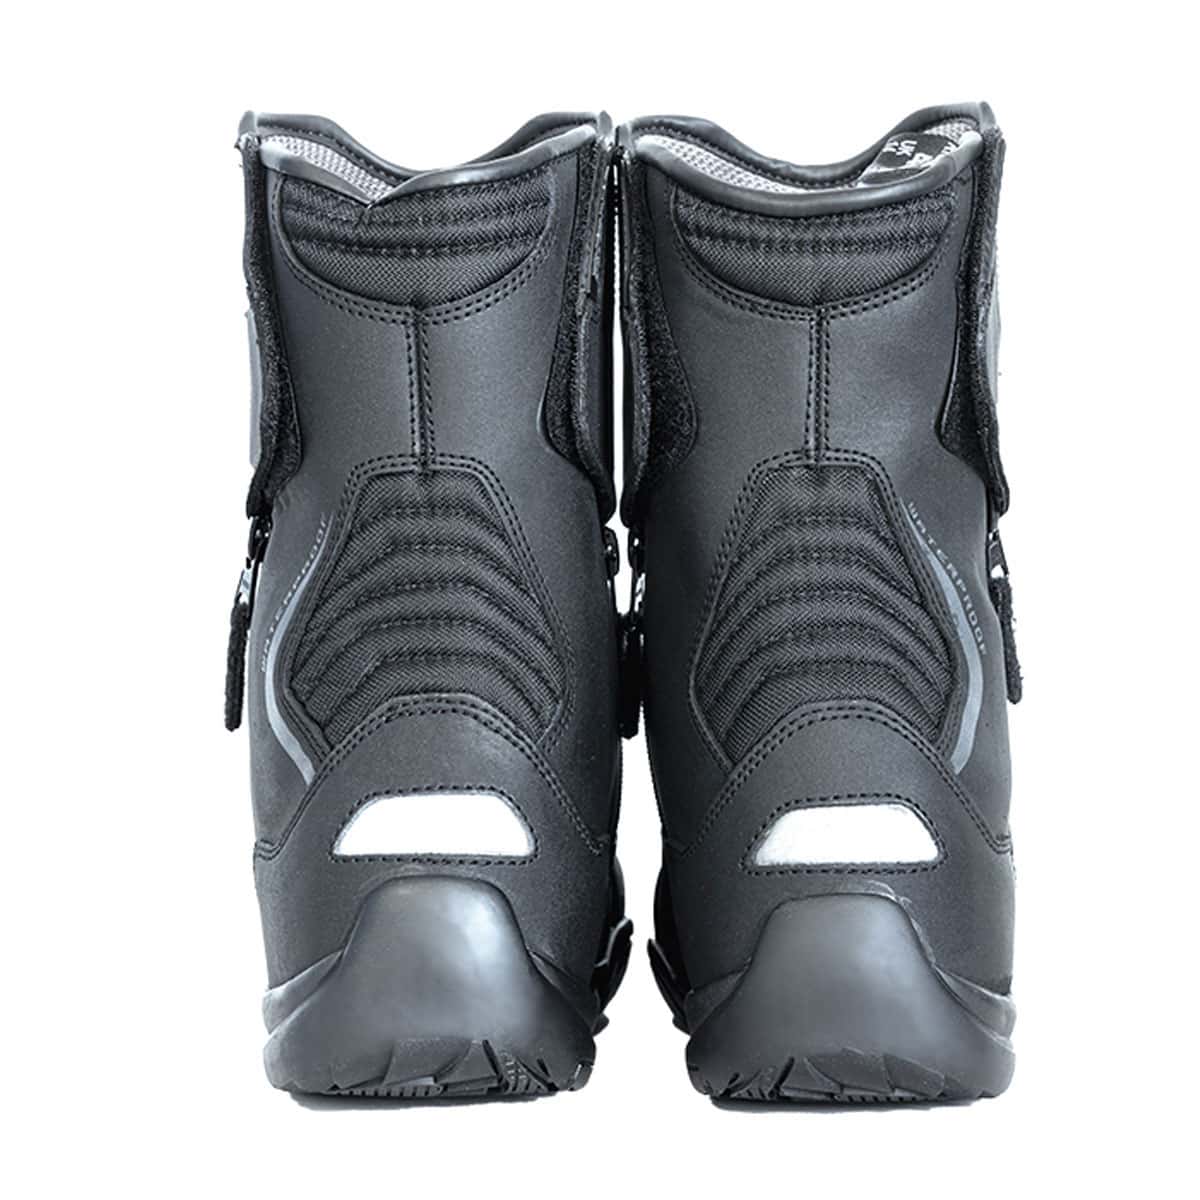 Richa waterproof short touring boots with double zip opening for ease - Back 